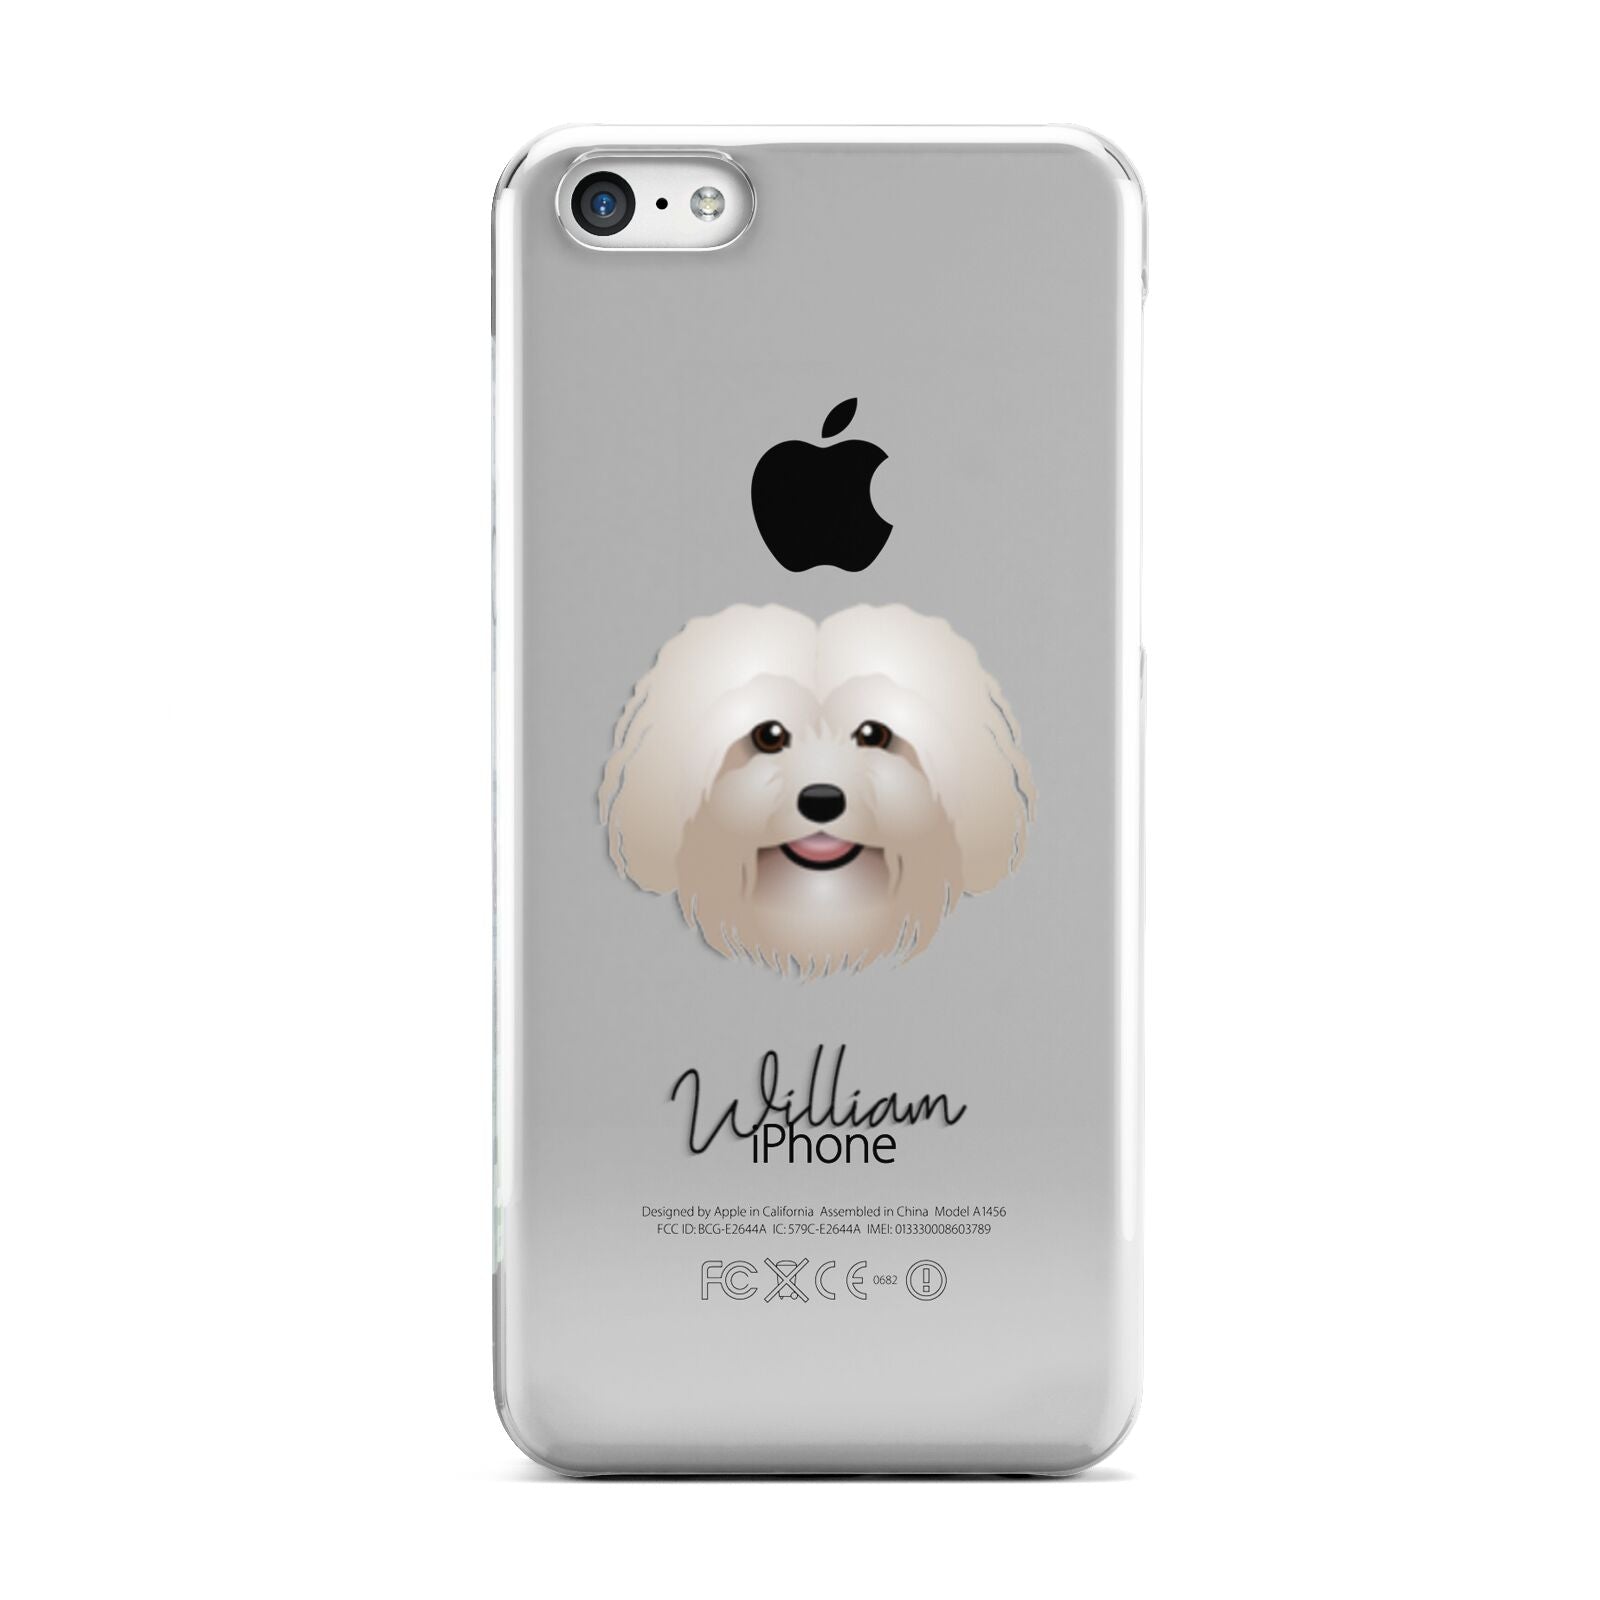 Bolognese Personalised Apple iPhone 5c Case